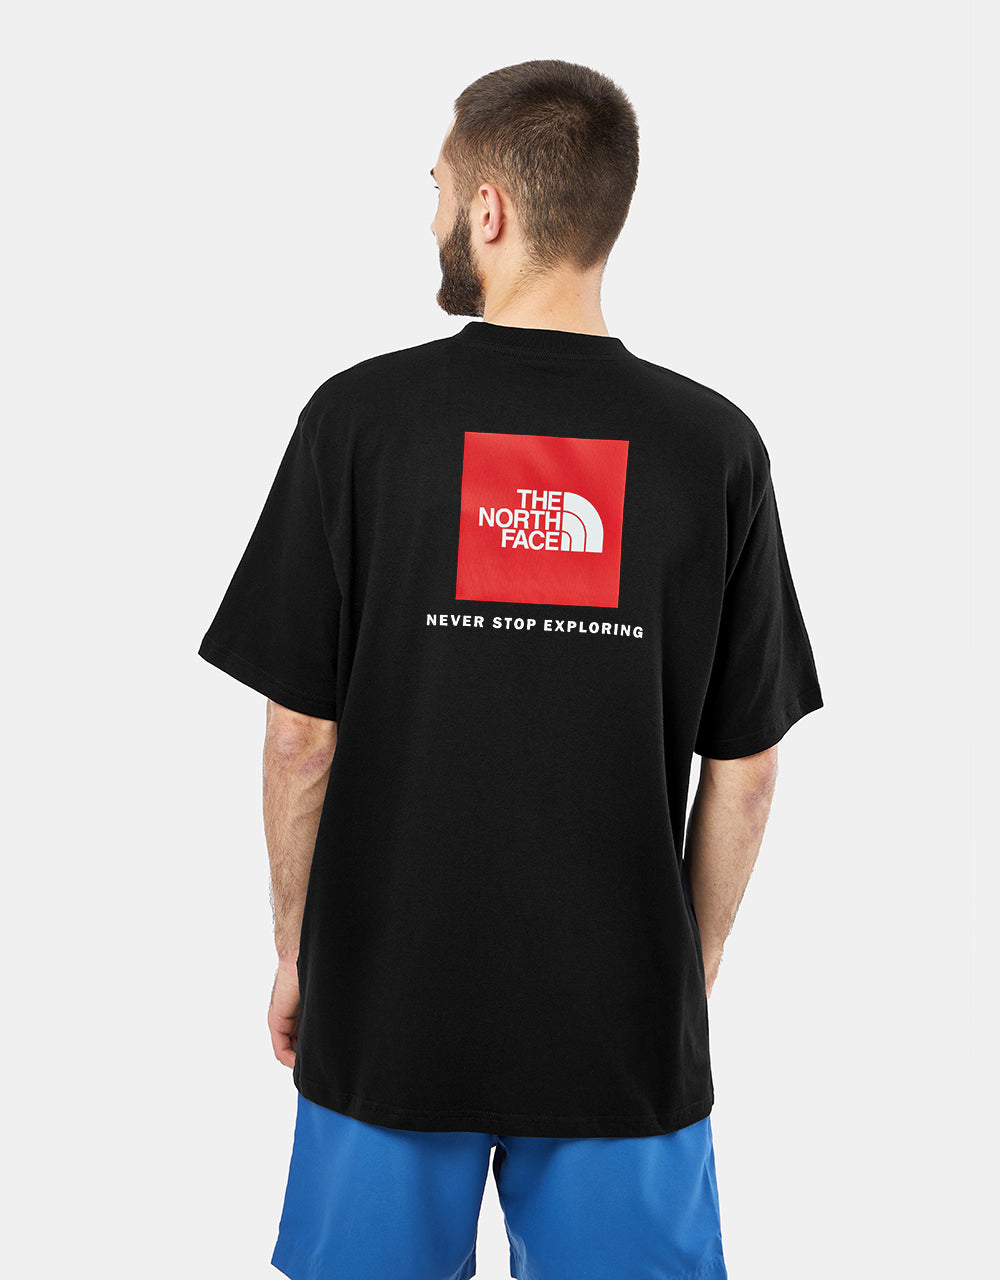 The North Face S/S Red Box T-Shirt - TNF Black